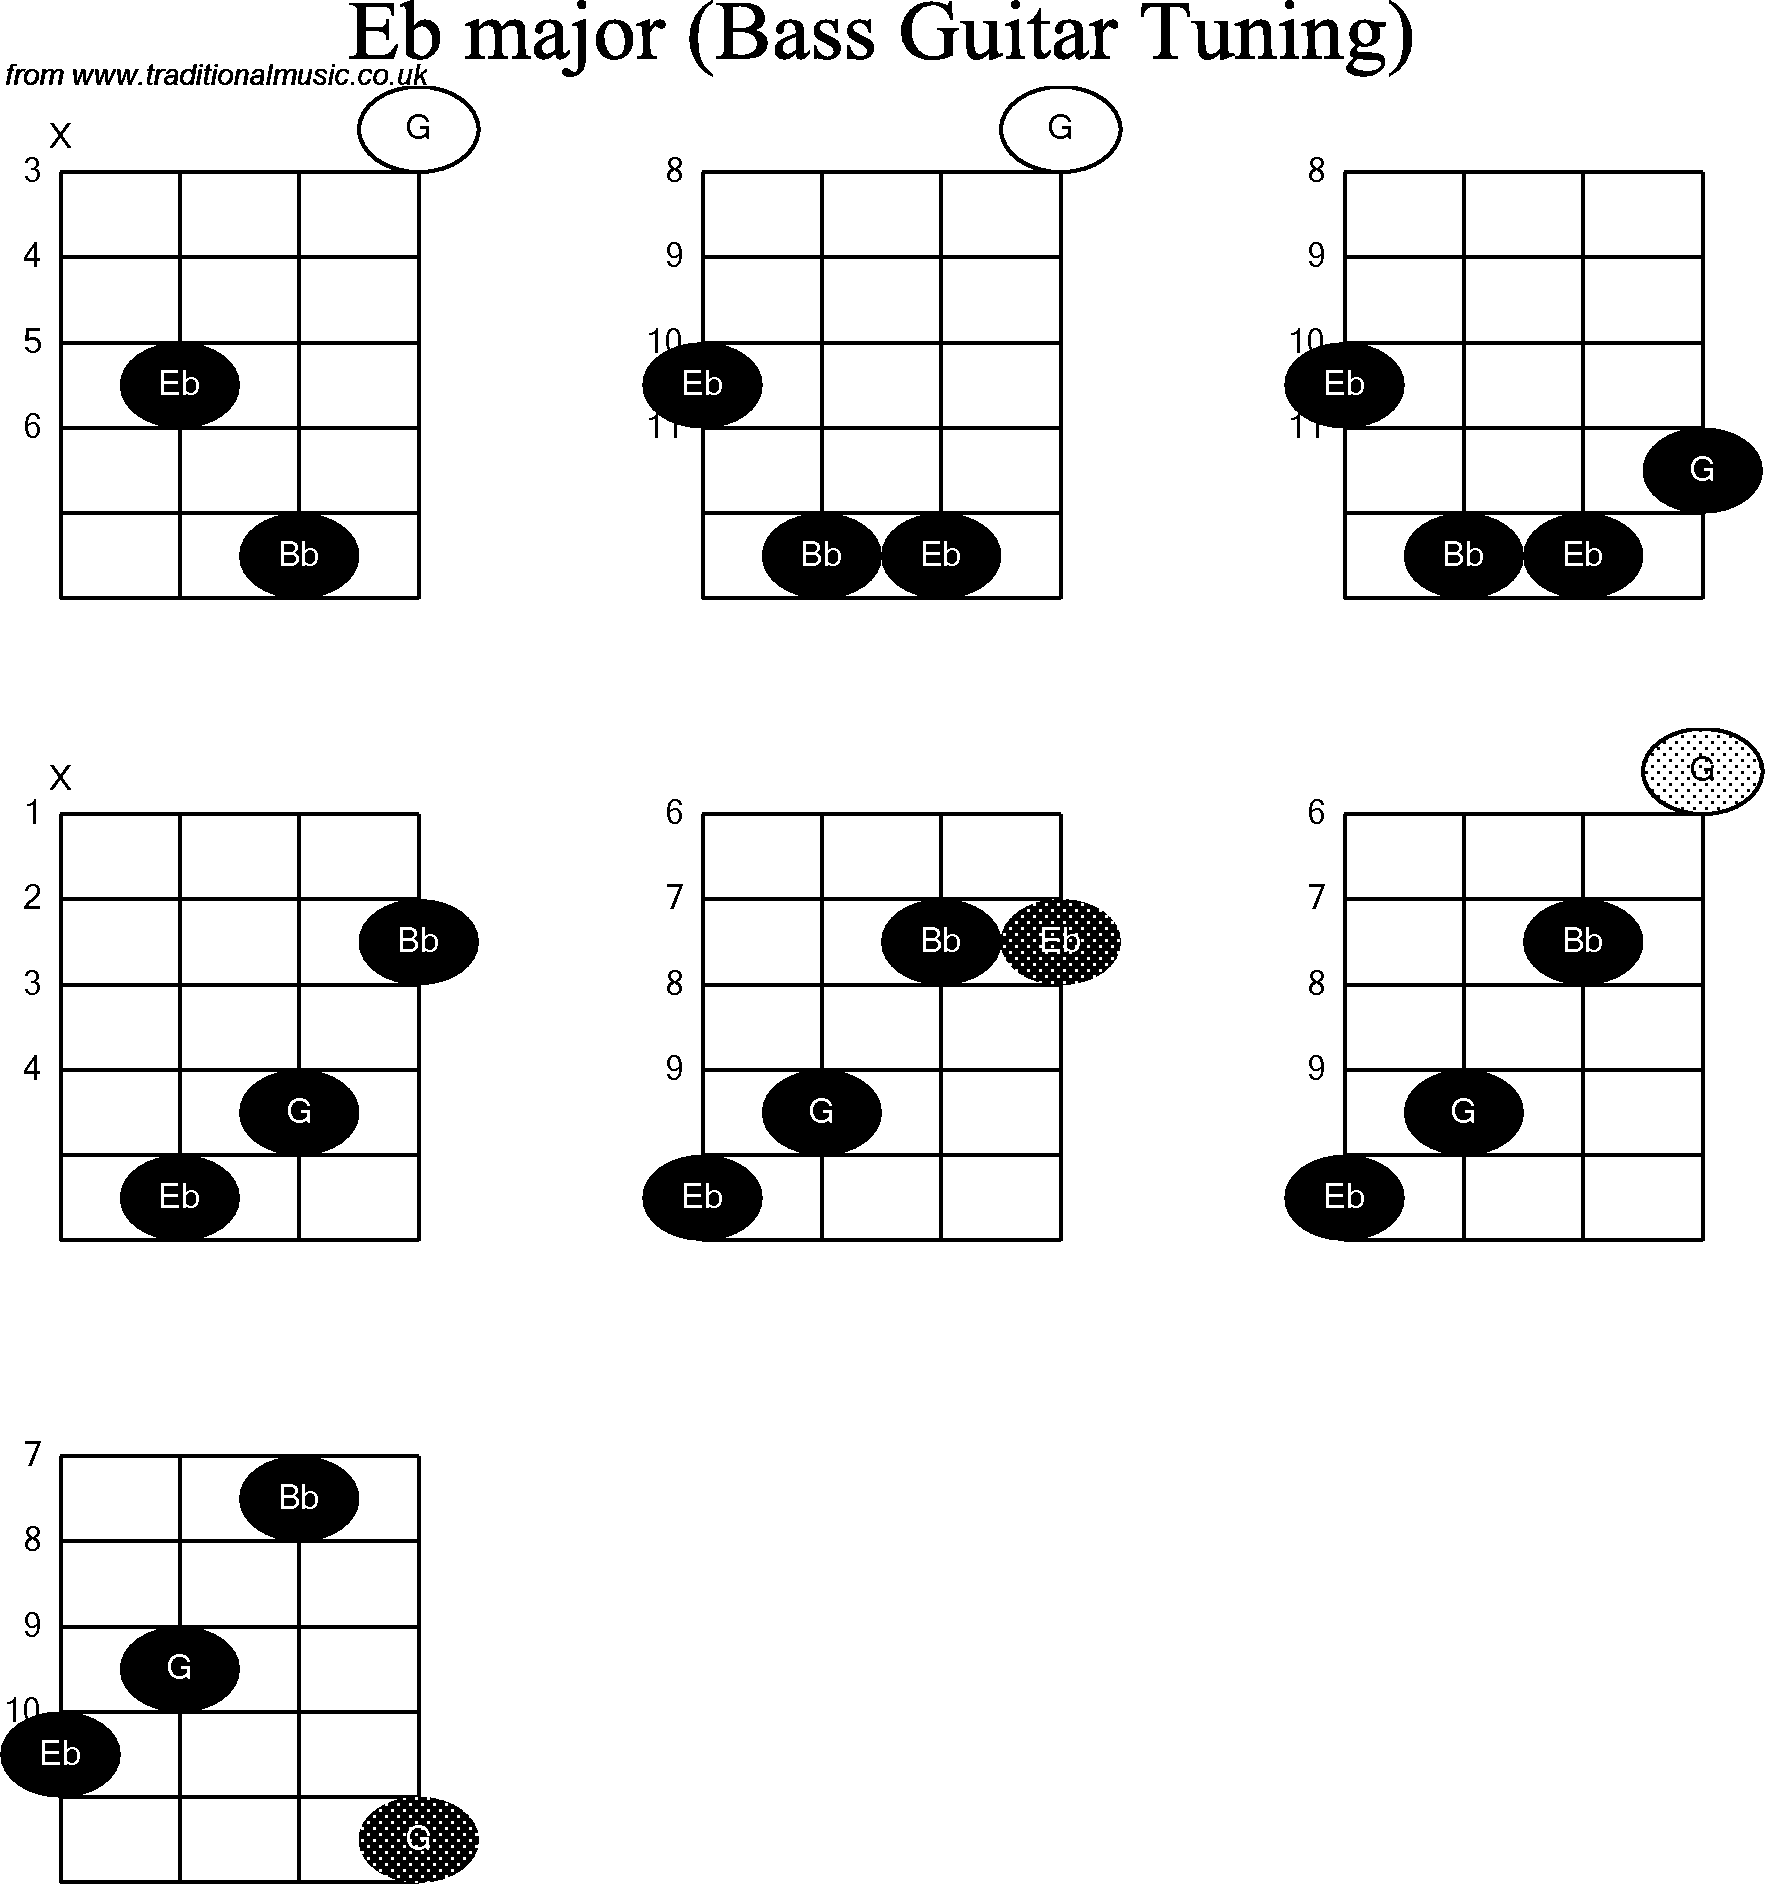 Bass Guitar chord charts for: Eb